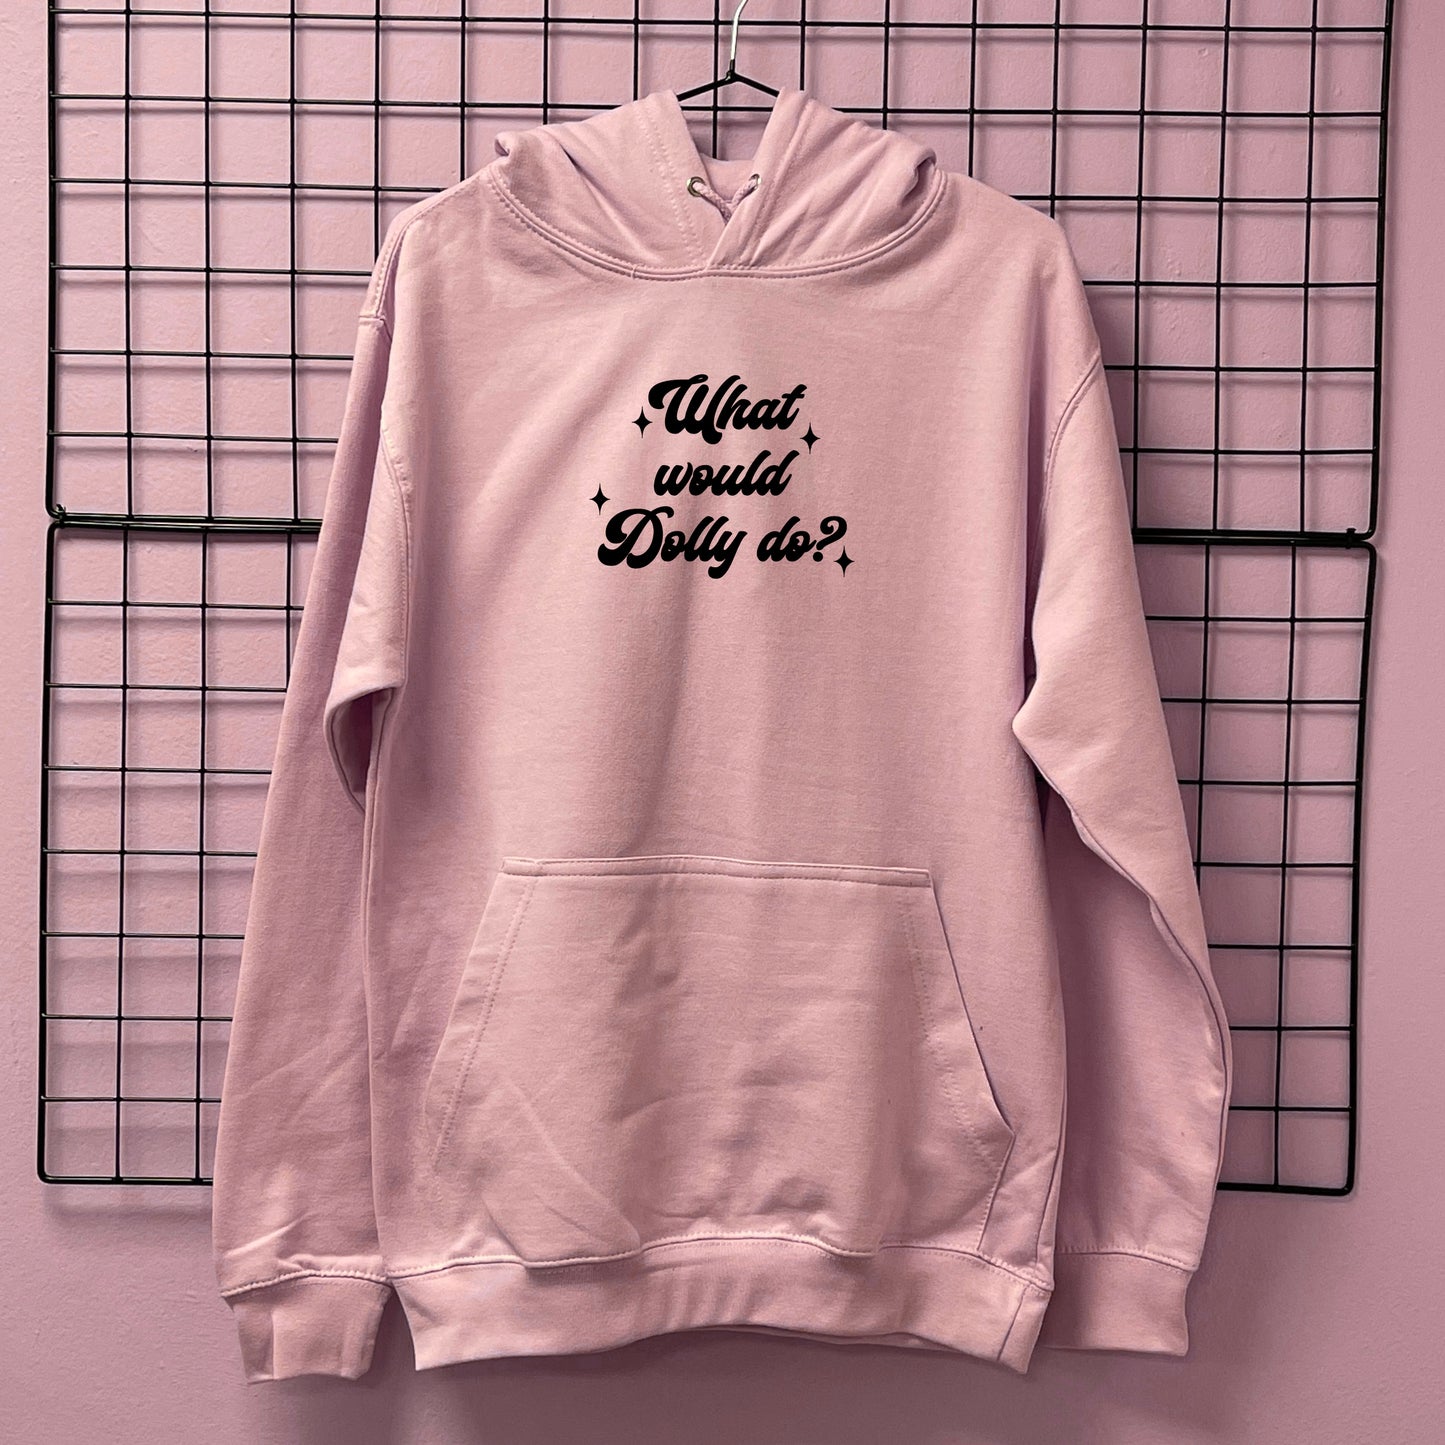 WHAT WOULD DOLLY DO HOODIE